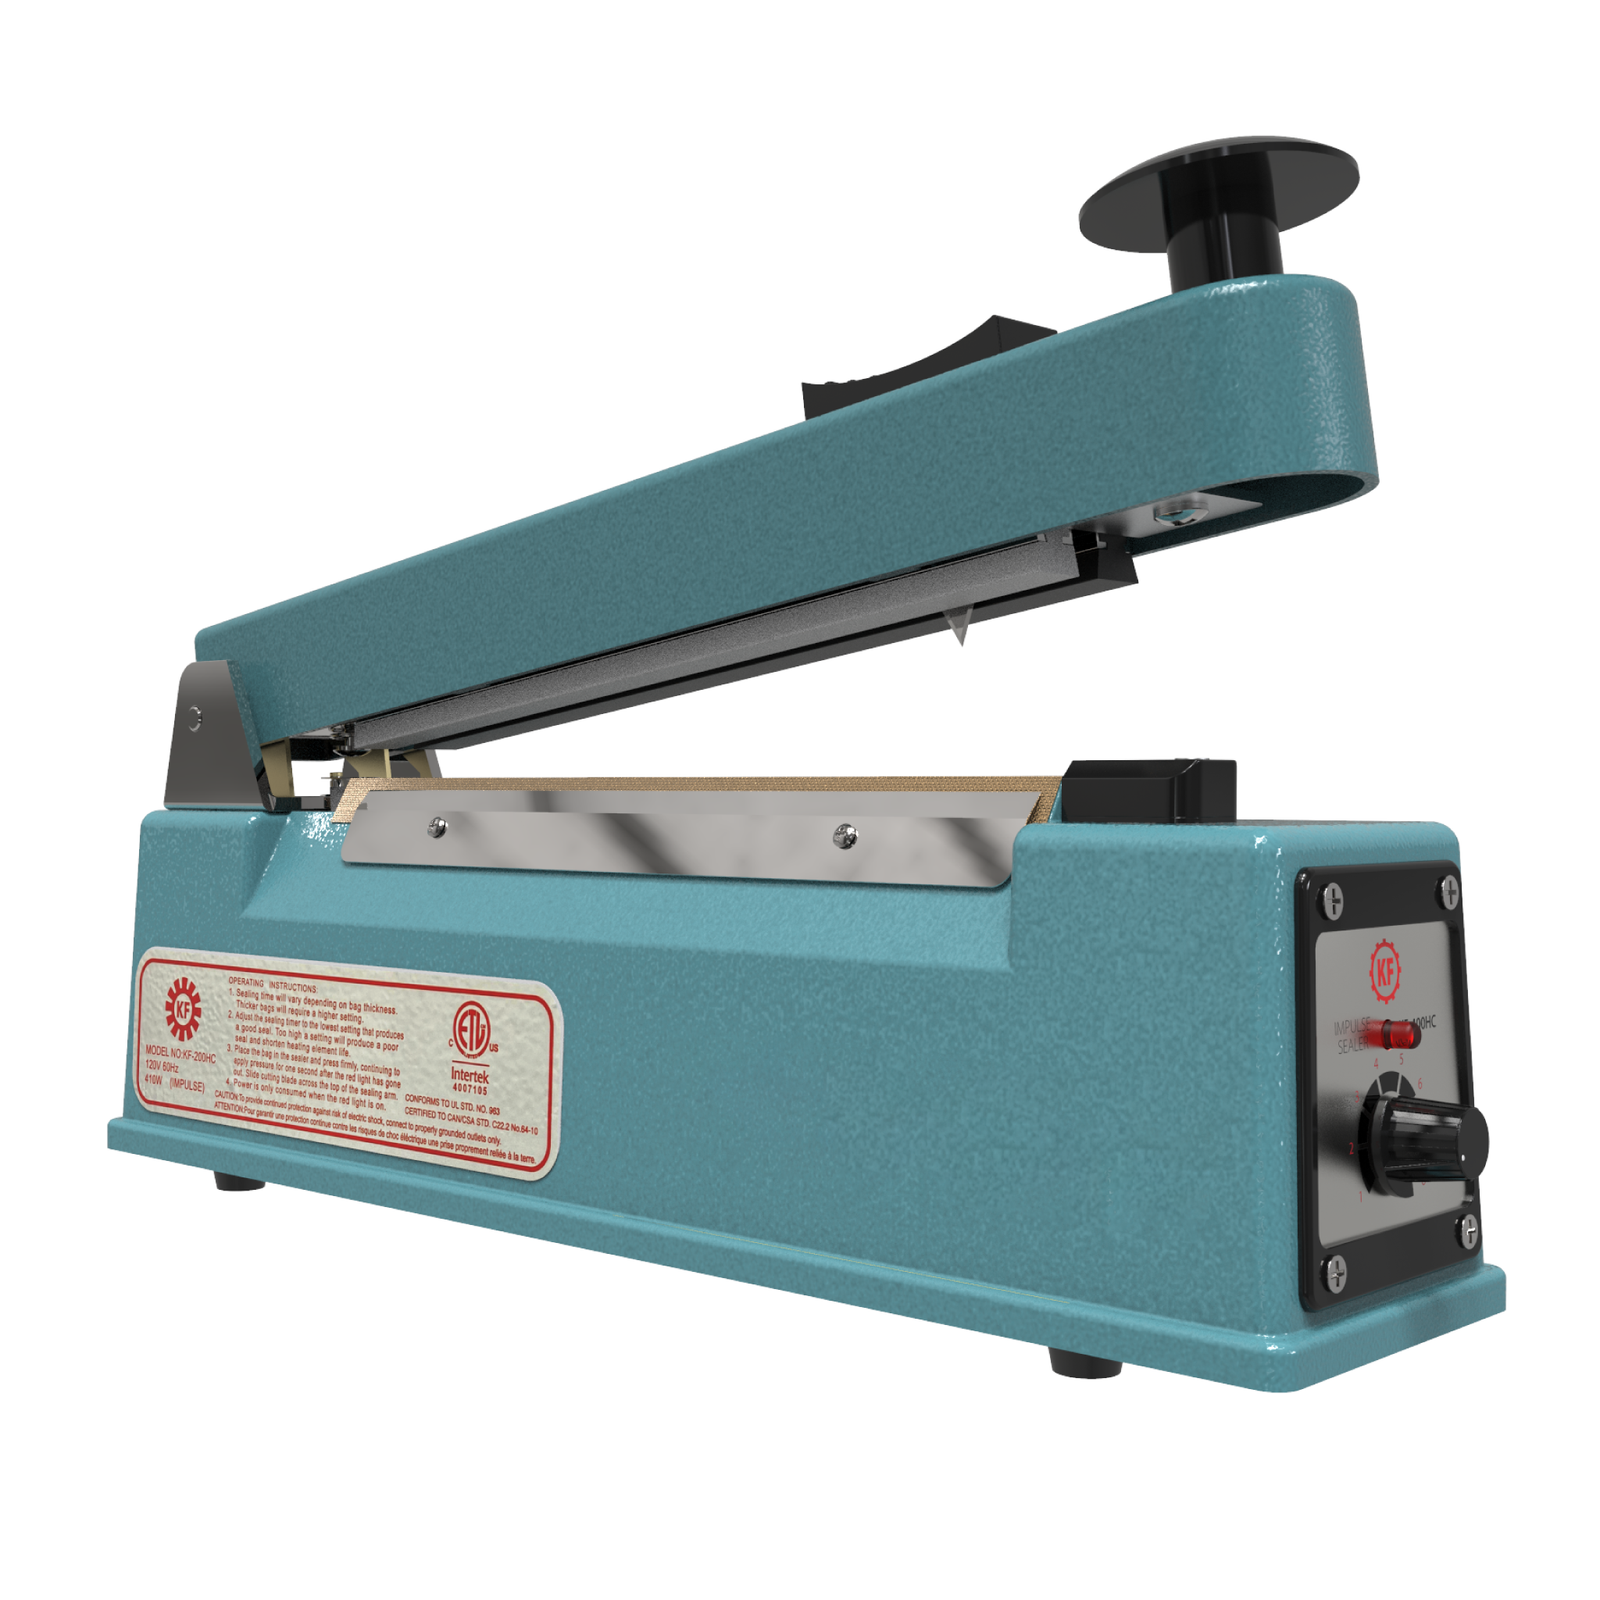 Blue manual impulse sealer machine with cutter over white background. Heat sealing machine is with the jaw open